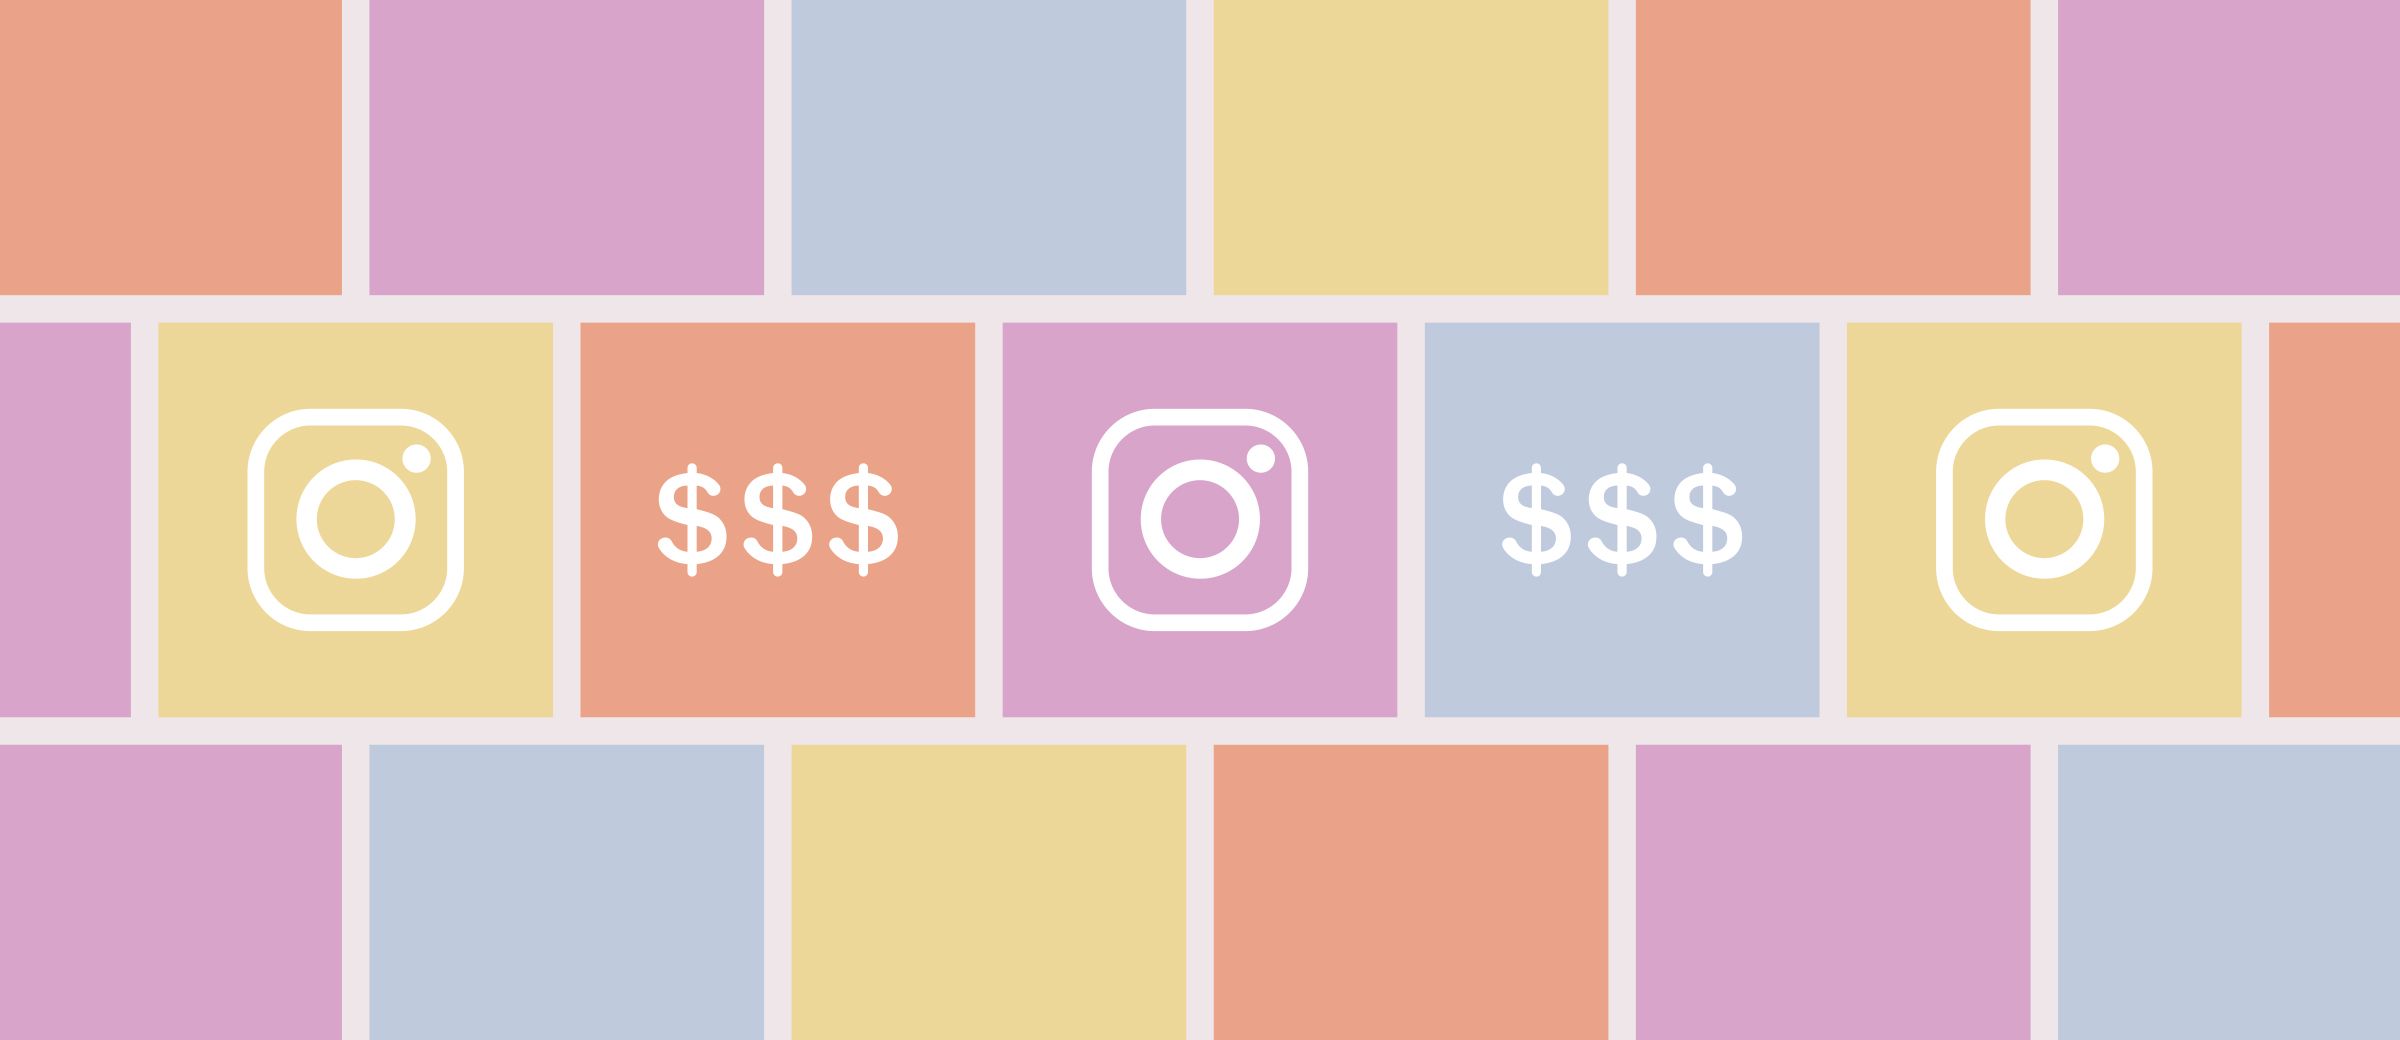 How to Monetize Instagram: 3 Tips for Beginners, by megan-martinez